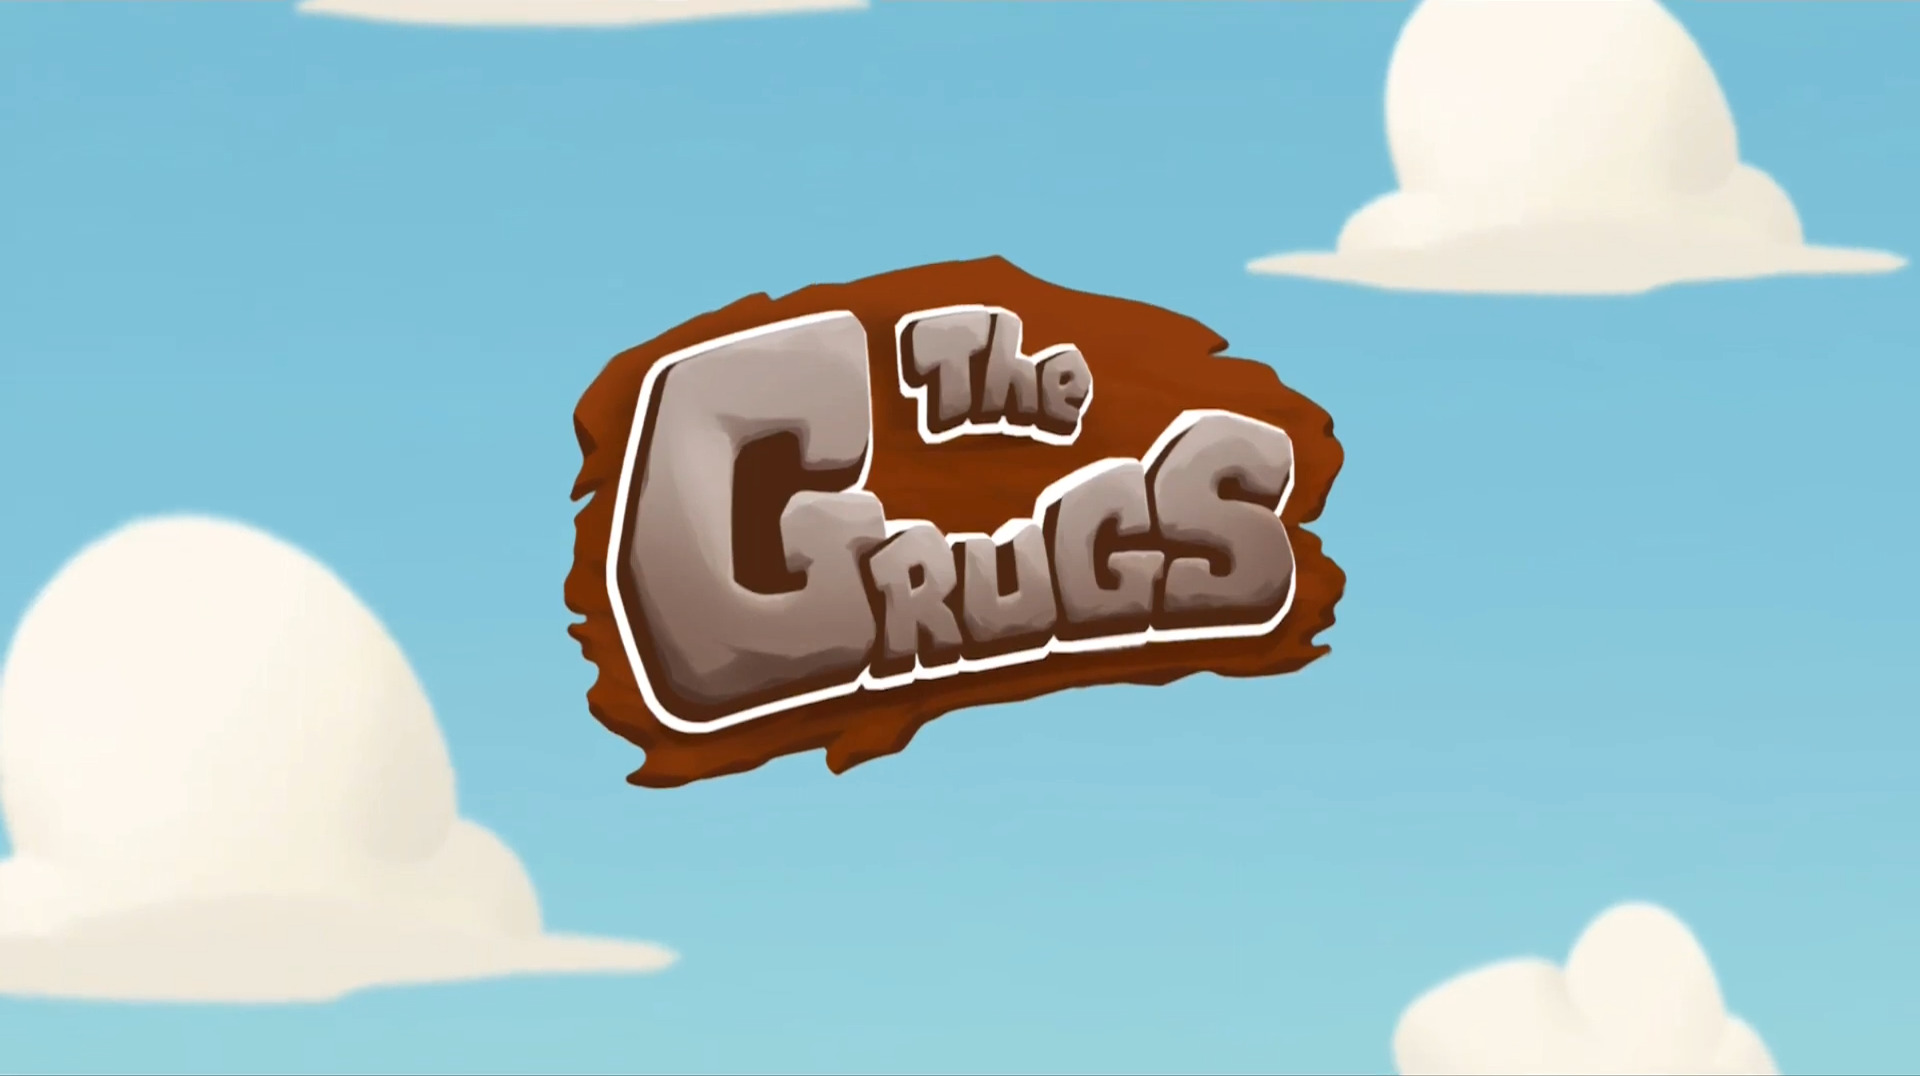 Scarica The Grugs: Hector's rest quest gratis per Android.